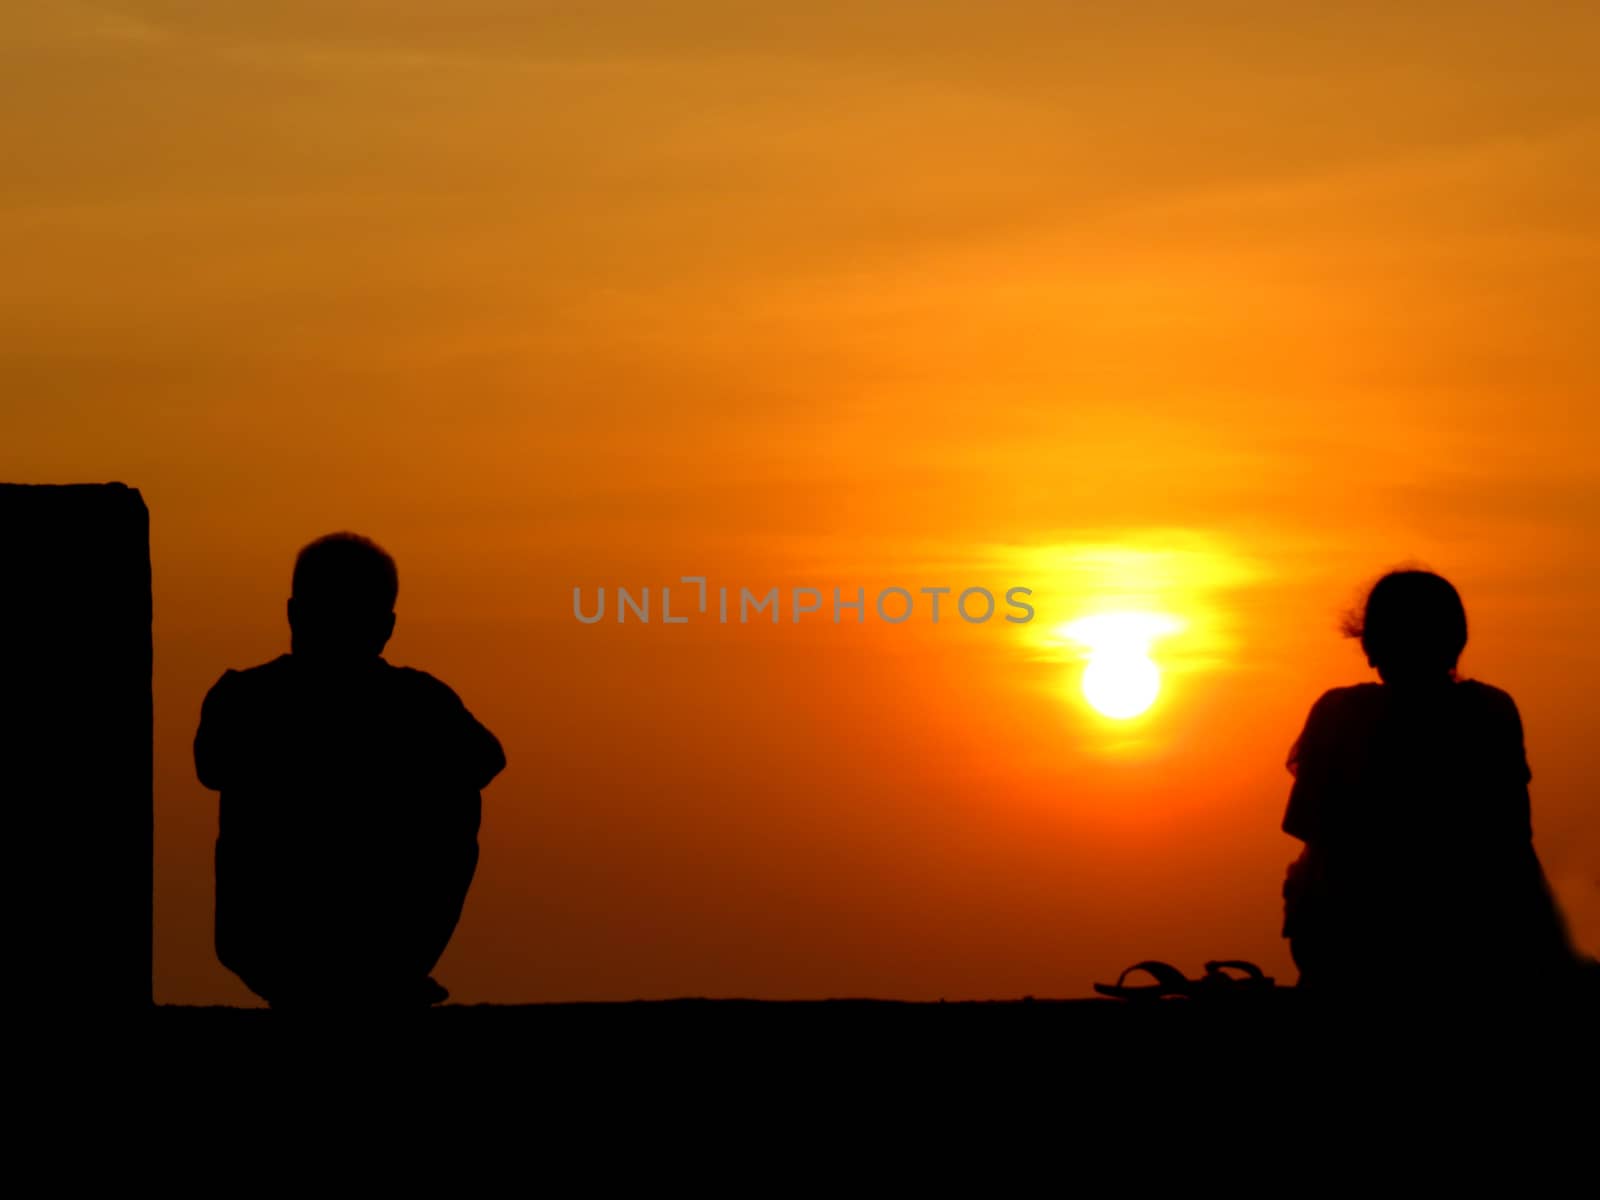 A metaphorical image of the silhouettes of a seperated couple on the backdrop of a sunset.                               